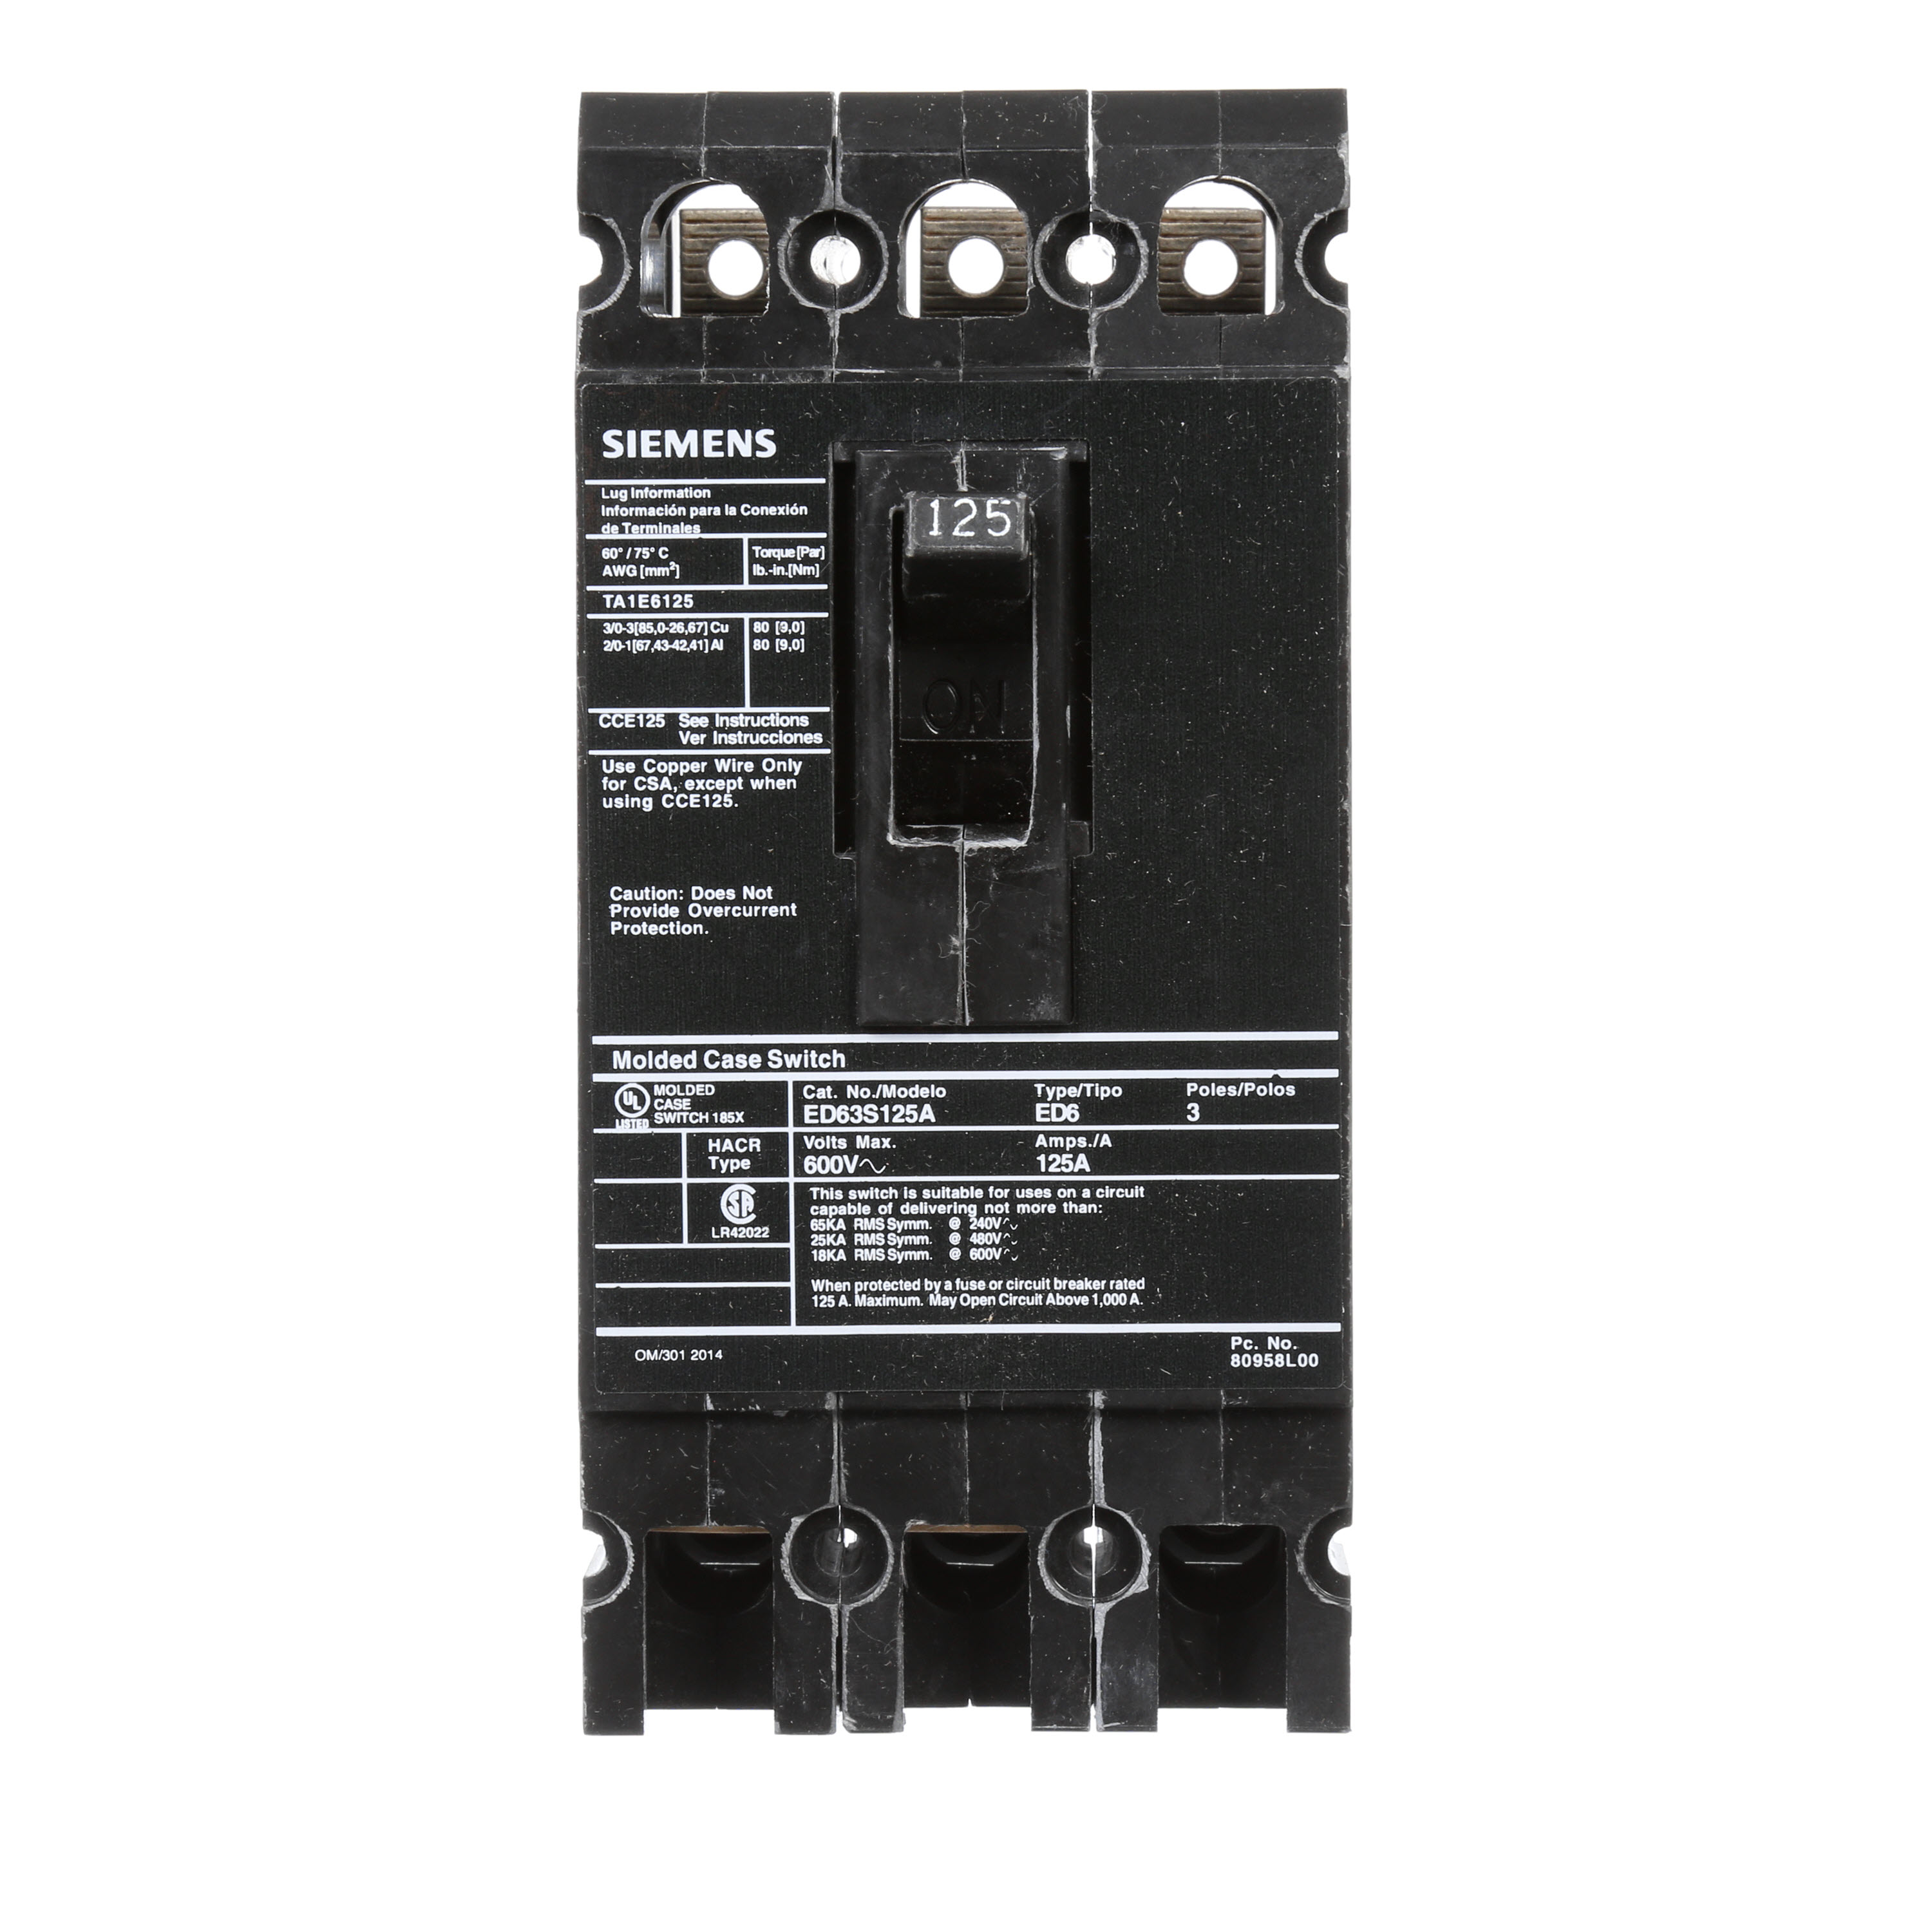 SIEMENS LOW VOLTAGE SENTRON MOLDED CASE CIRCUIT BREAKER WITH MAGNETIC ONLY TRIPUNIT. MOLDED CASE SWITCH (BREAKER) ED FRAME WITH STANDARD BREAKING CAPACITY. 125A 3-POLE 600V 1000A SELF-PROTECTIVE INSTANTANEOUS OVERRIDE. NON-INTERCHANGEABLETRIP UNIT. SPECIAL FEATURES LOAD LUGS ONLY (TA1E6125) WIRE RANGE 3 - 3/0AWG (CU) / 1 - 2/0AWG (AL). DIMENSIONS (W x H x D) IN 3.00 x 6.4 x 3.92.